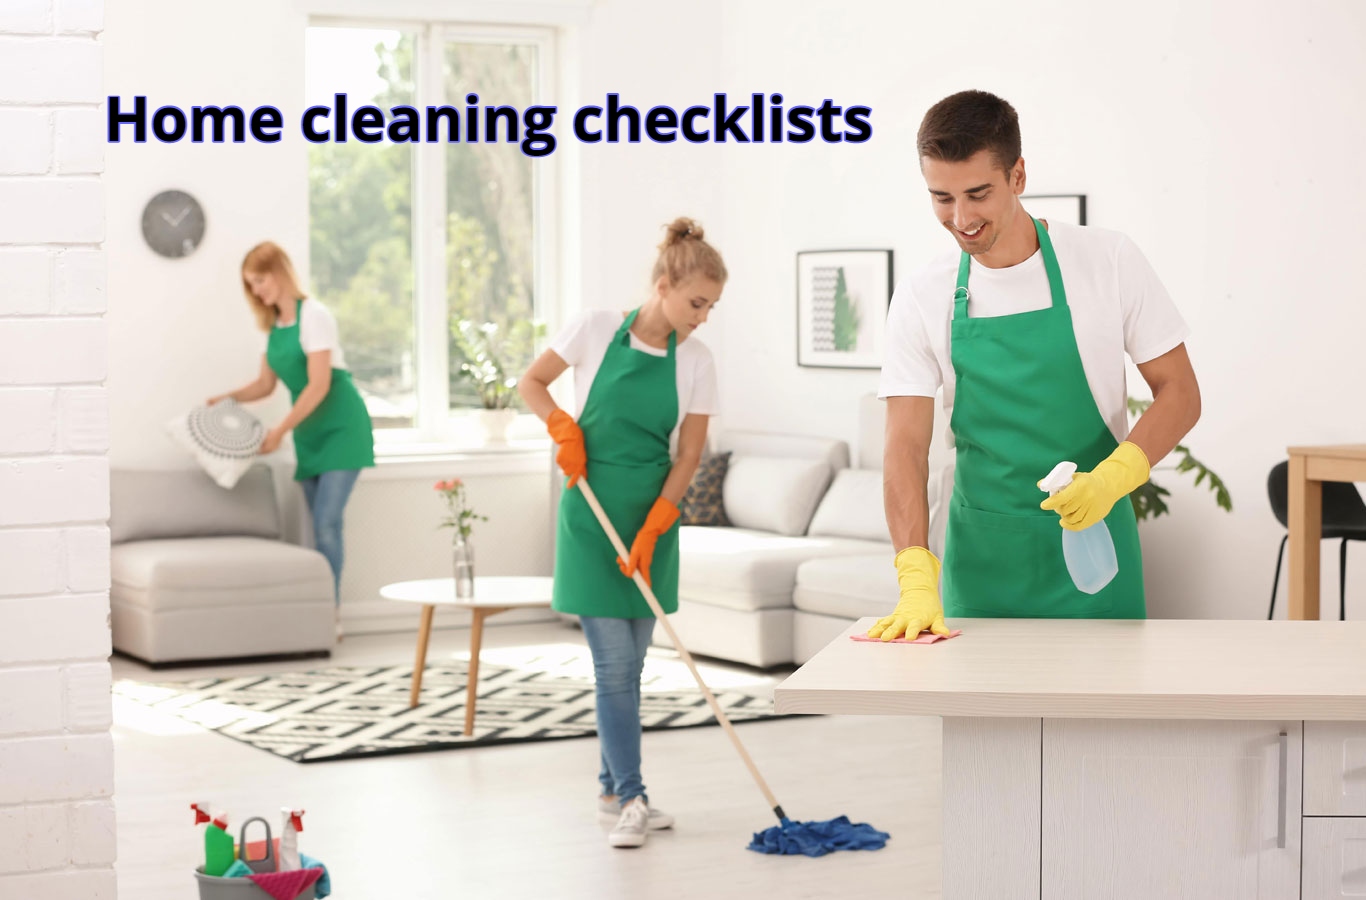 Home cleaning checklists